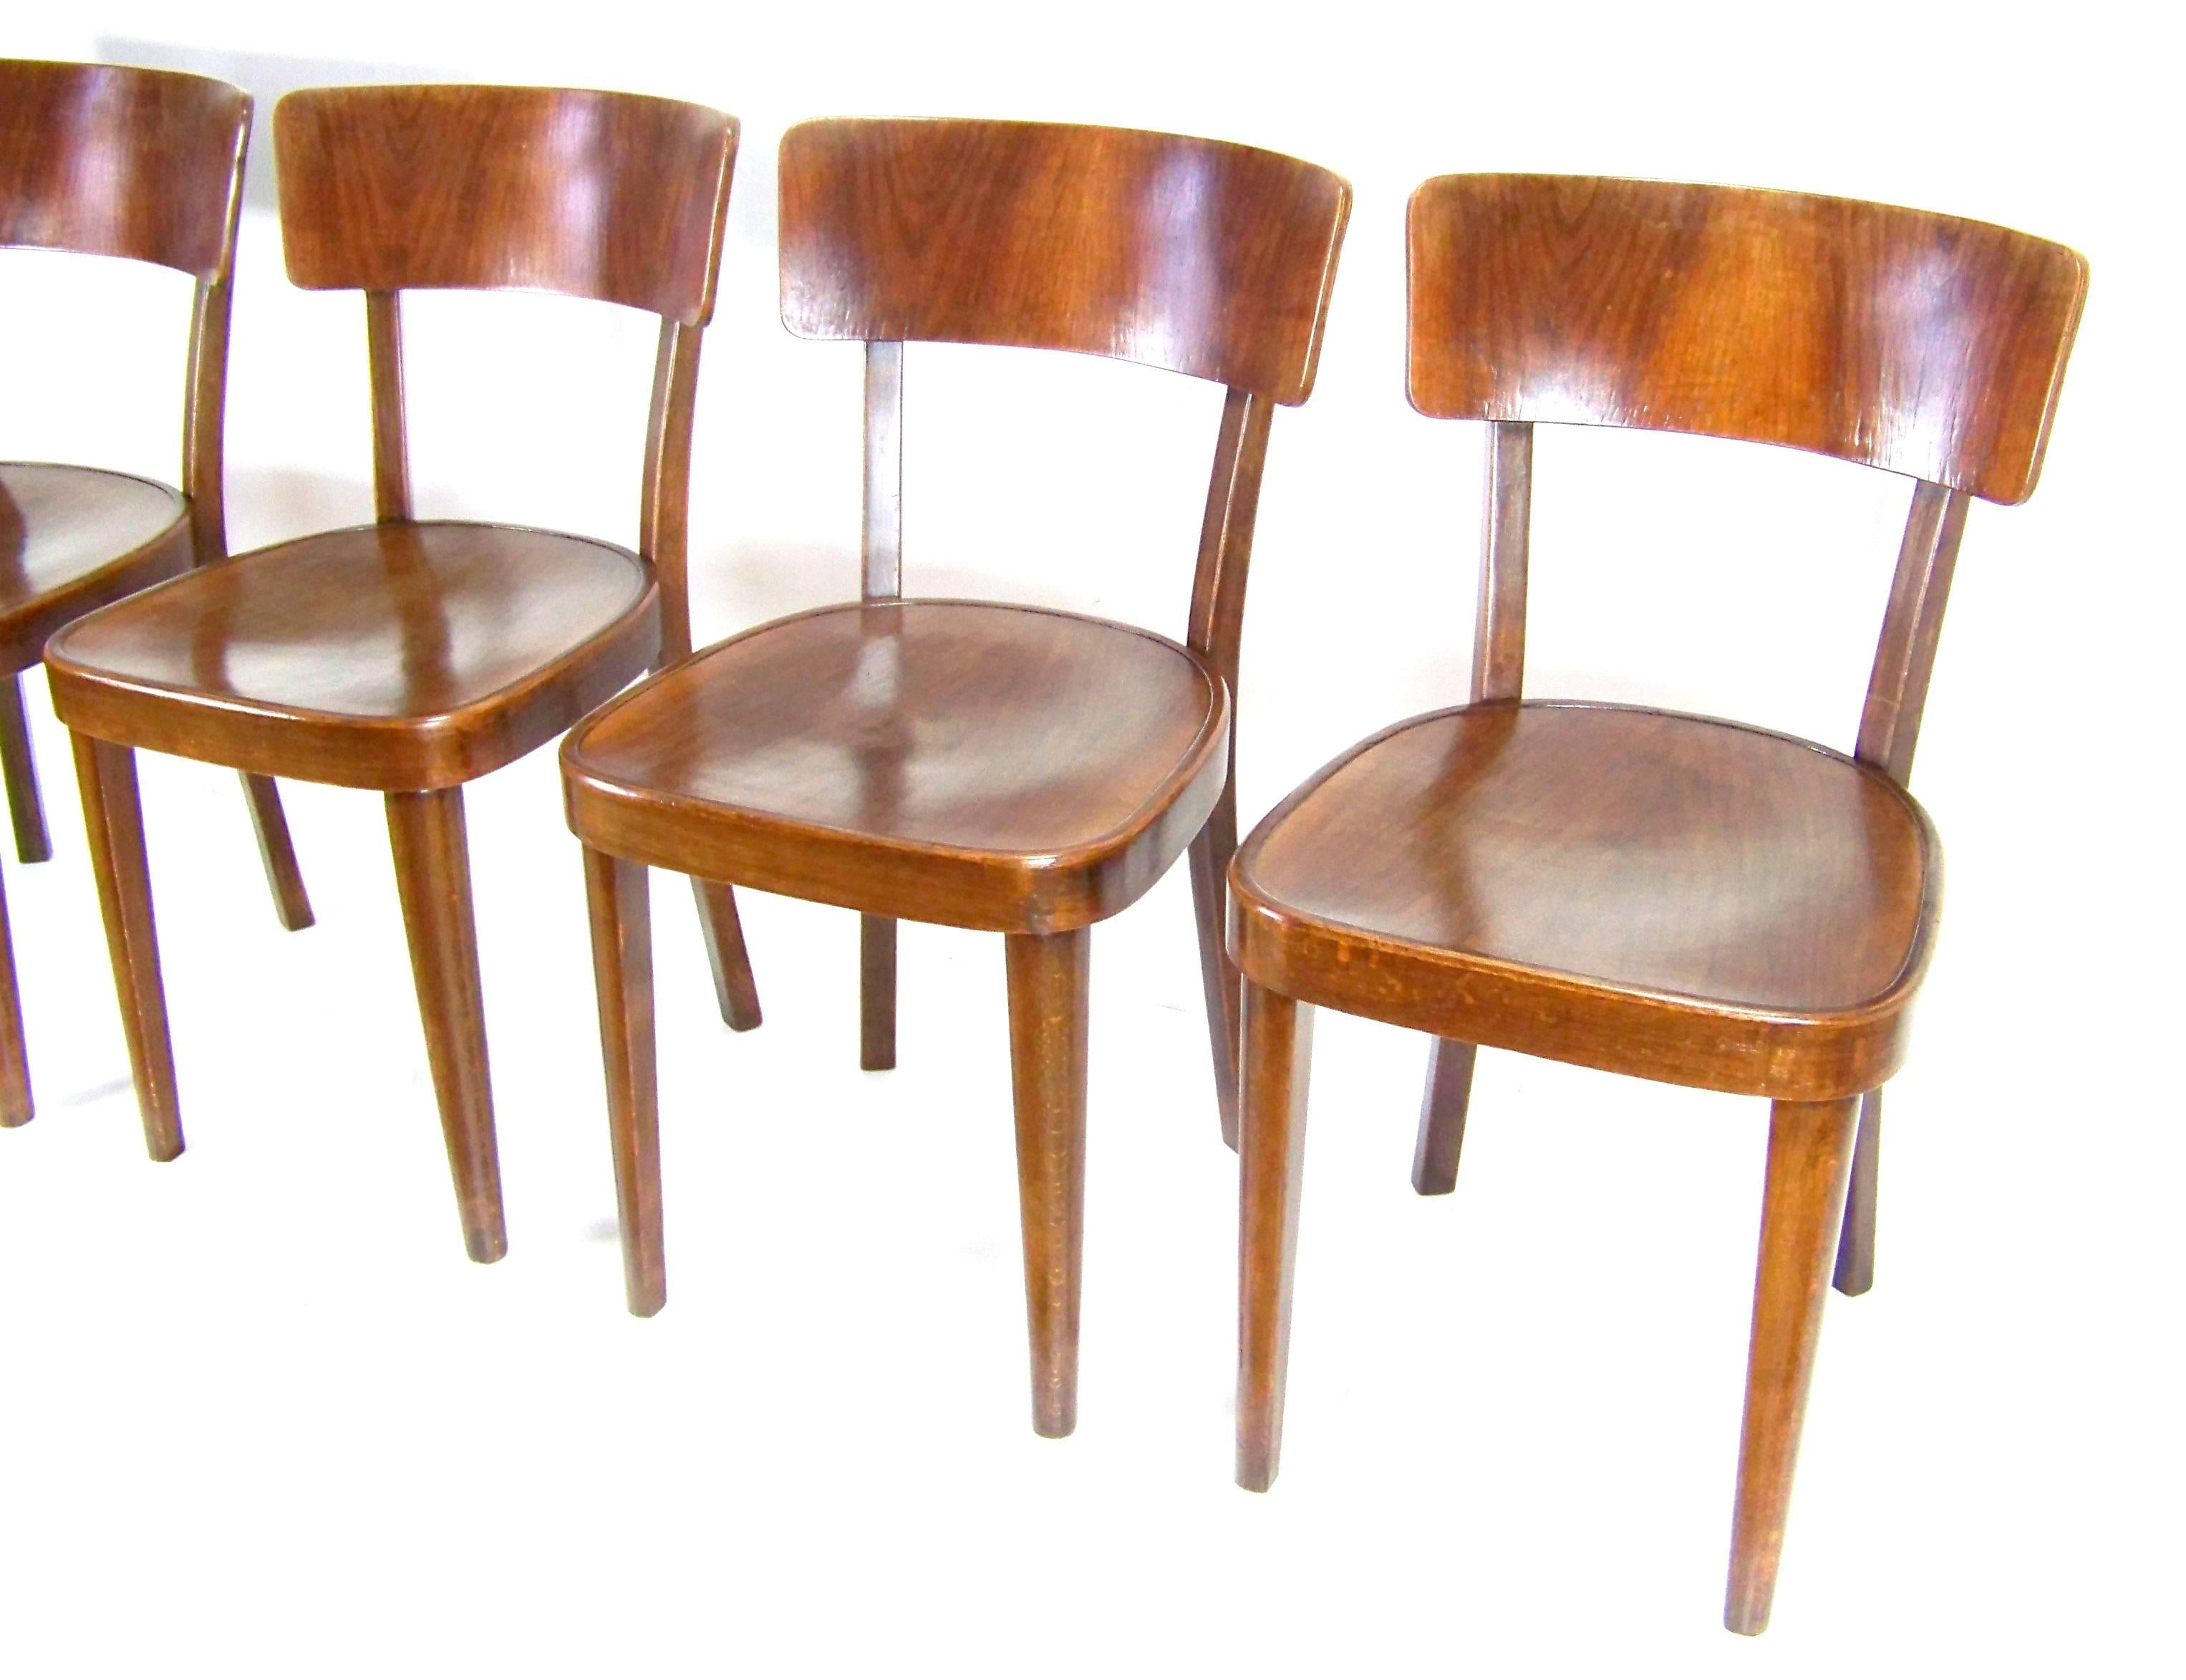 Czech Four Chairs Thonet A524 from 1927